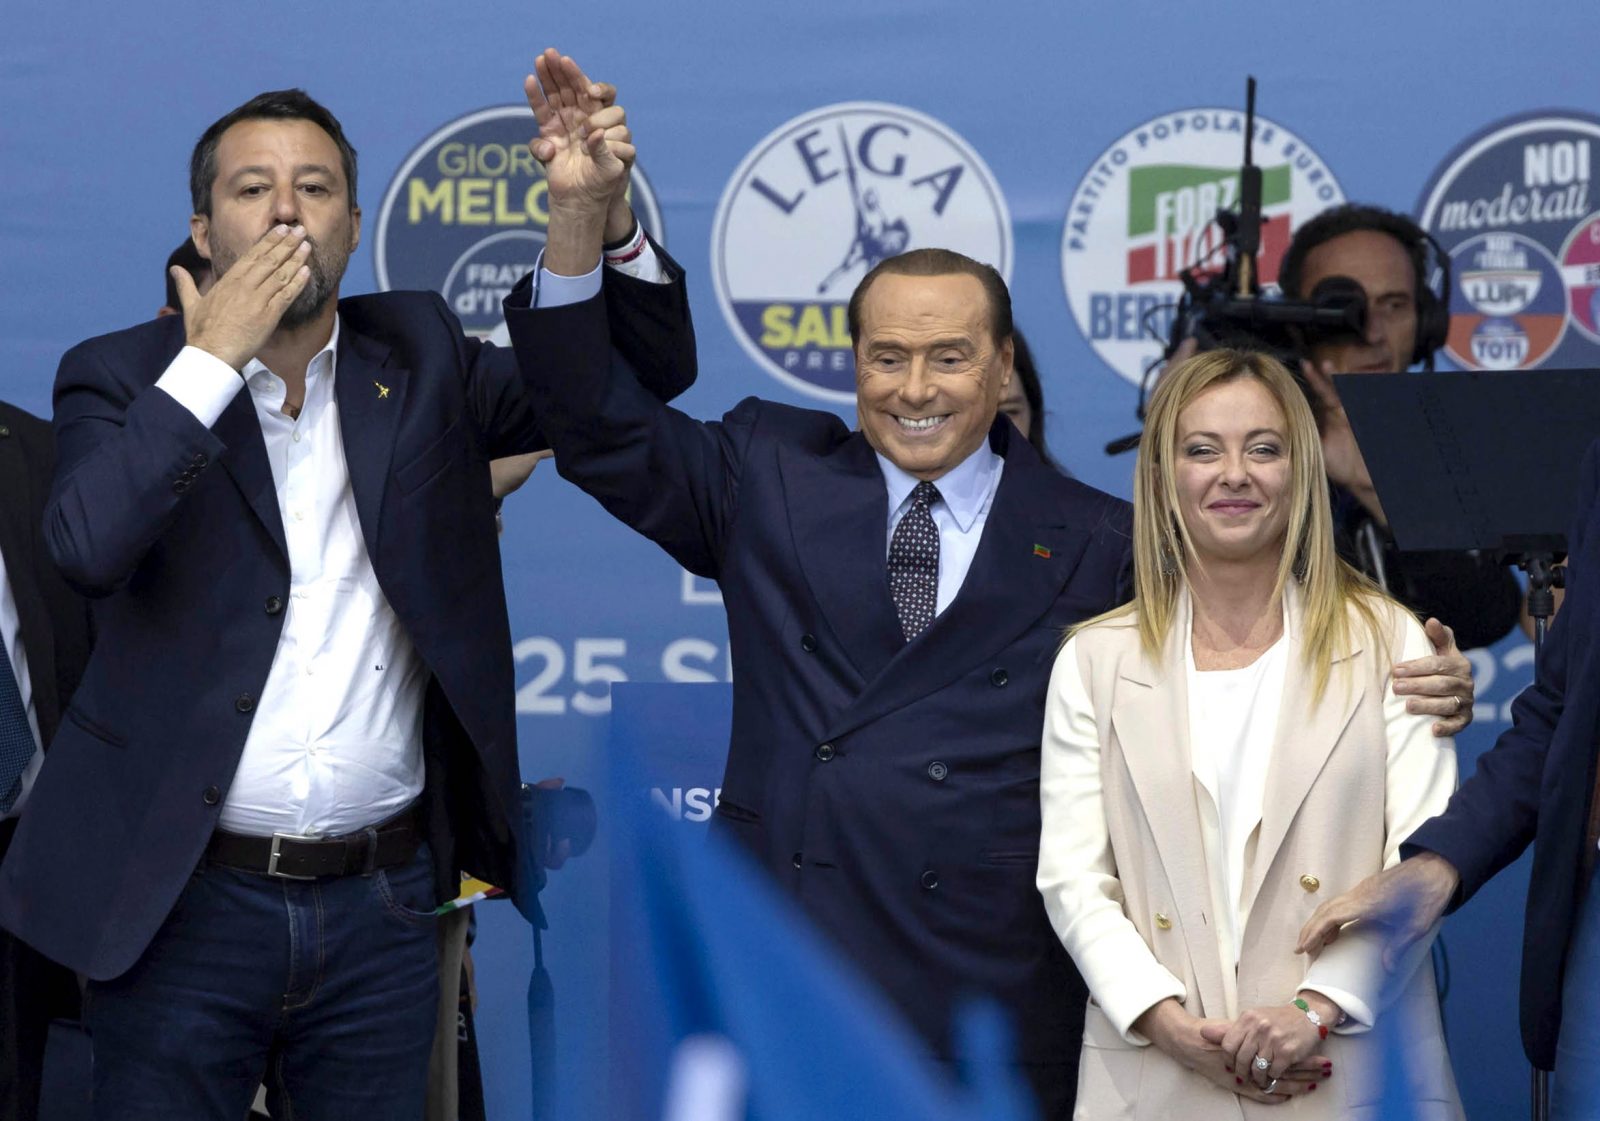 epa10199654 (L-R) Lega leader Matteo Salvini, Forza Italia leader Silvio Berlusconi, and Fratelli d'Italia leader Giorgia Meloni acknowledge supporters during a joint rally of Italy's right-wing parties at Piazza del Popolo, in Rome, Italy, 22 September 2022. Italy will hold snap elections on 25 September 2022 to elect a new prime minister.  EPA/MASSIMO PERCOSSI